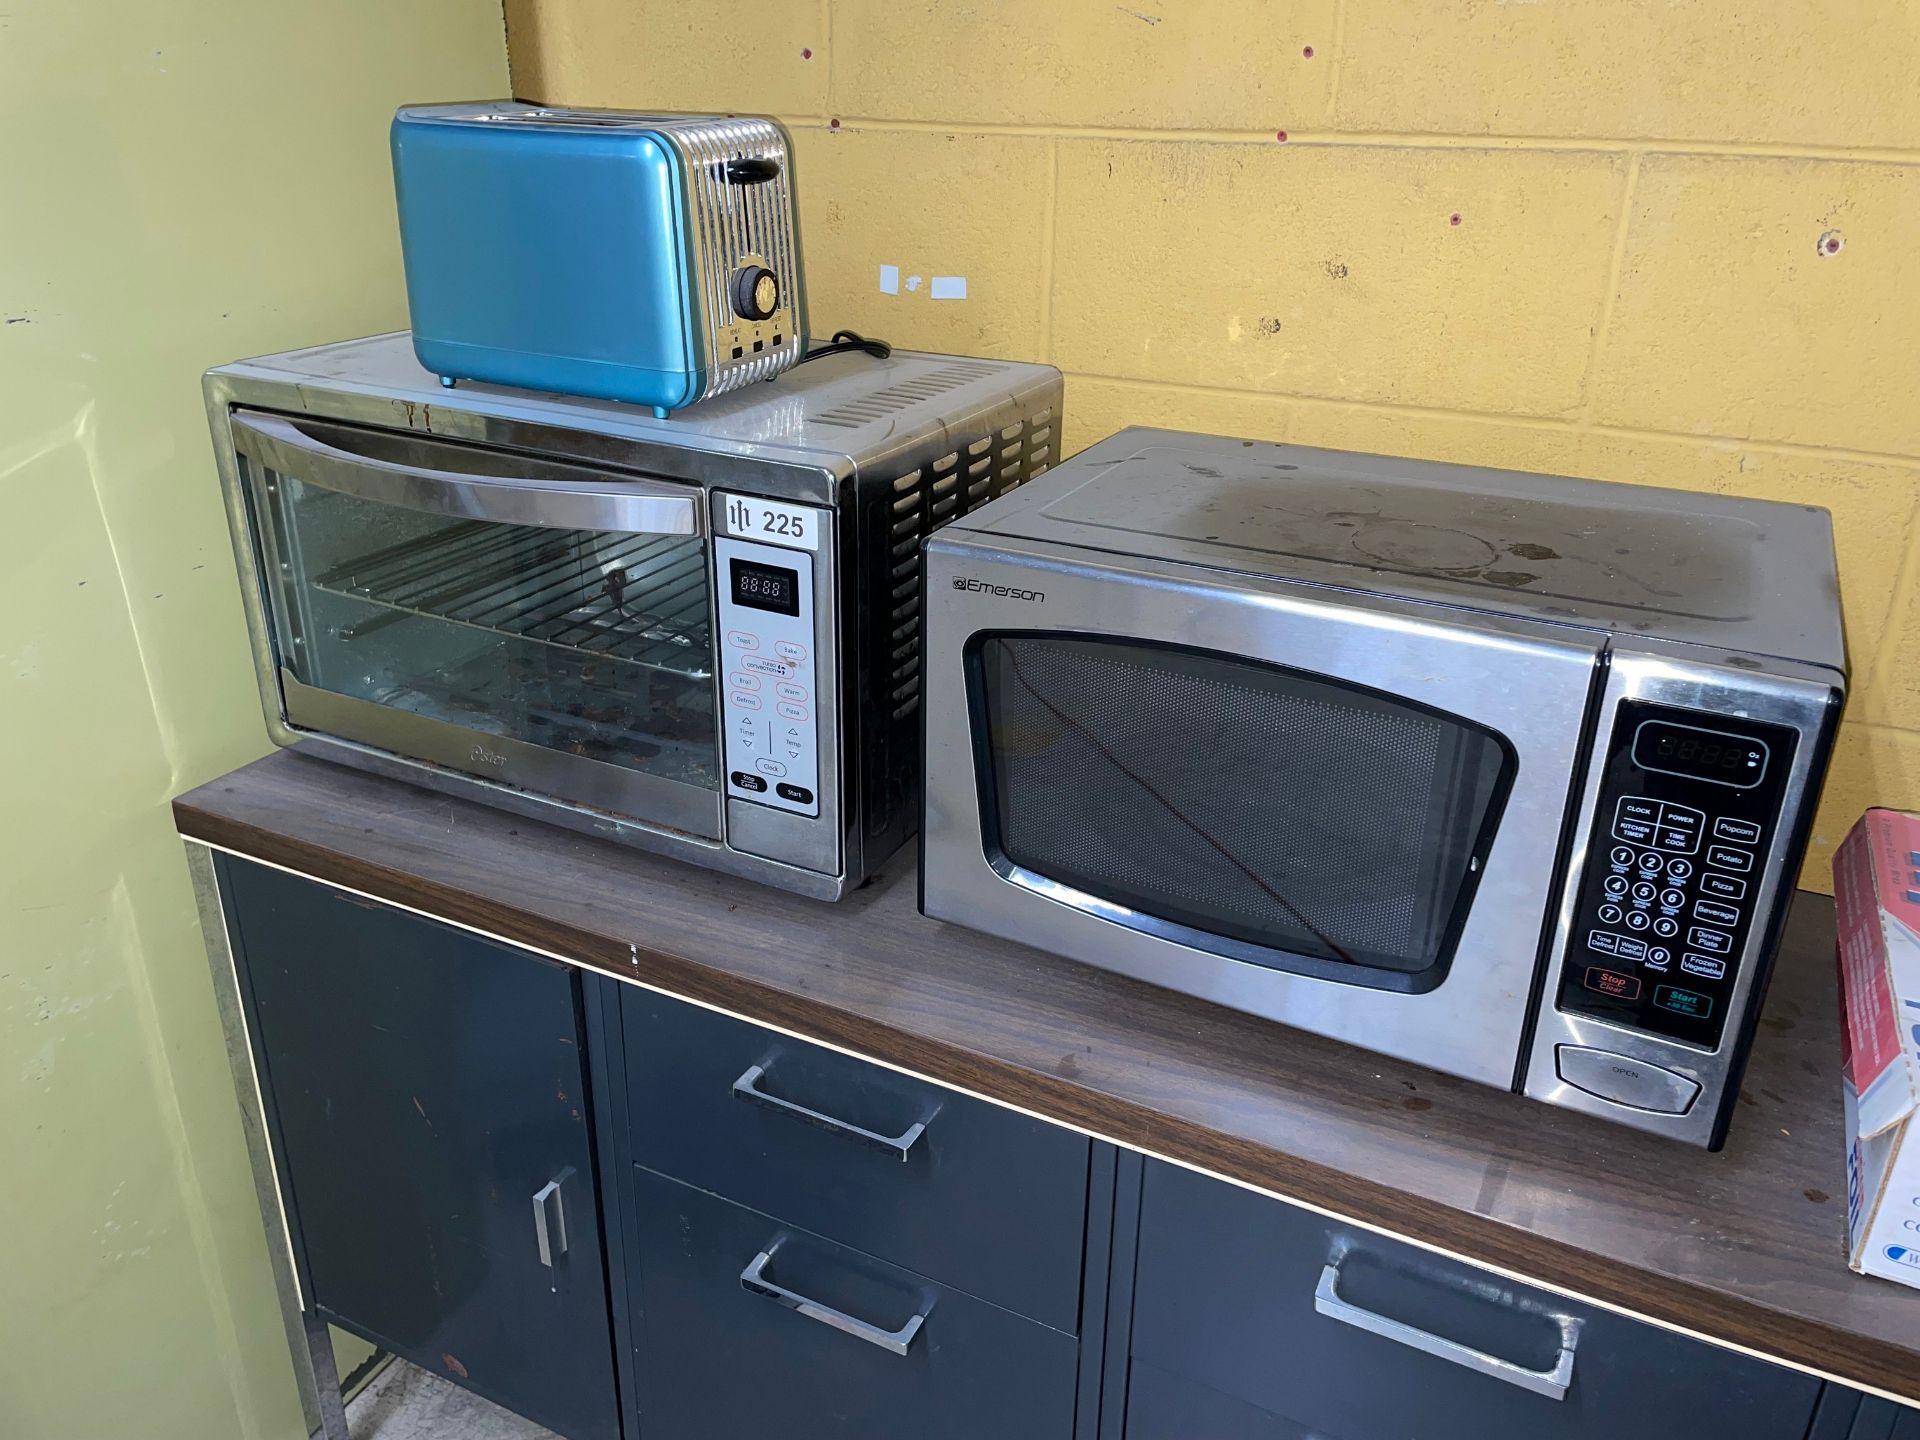 Lot including Oster Toaster Over, Emerson Microwave and Toaster - Image 2 of 3